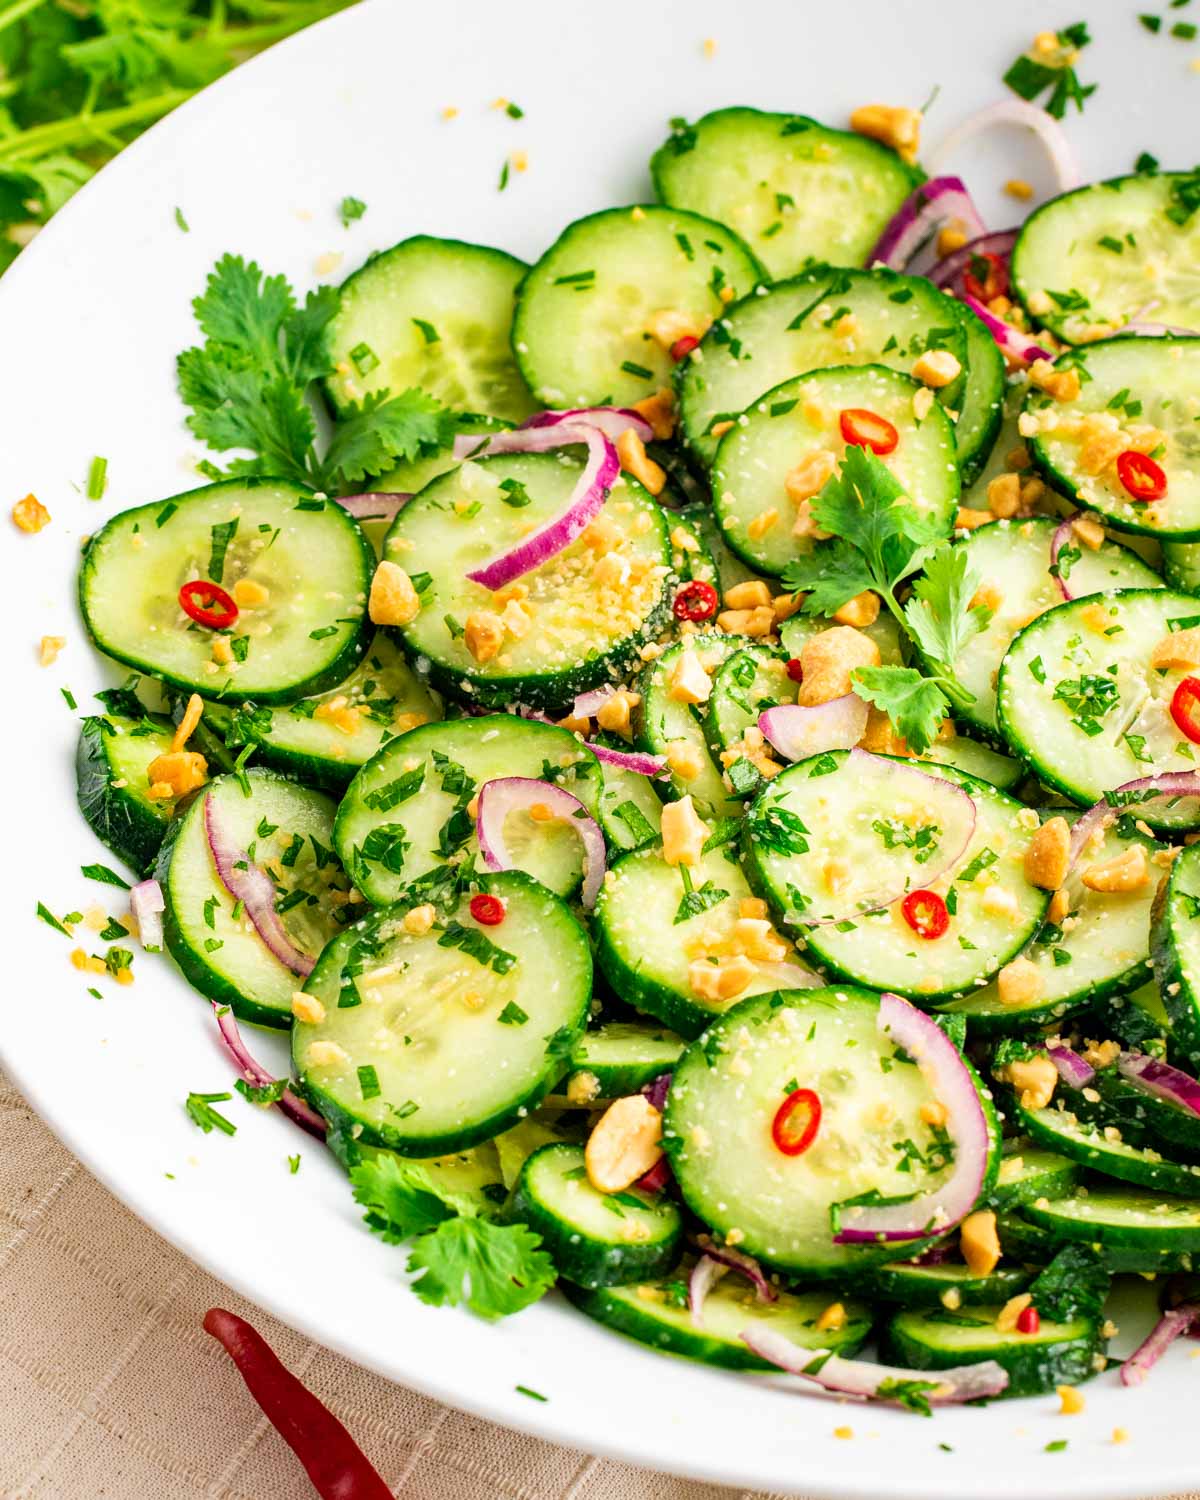 Thai Cucumber Salad garnished with Peanuts and Thai Chilis